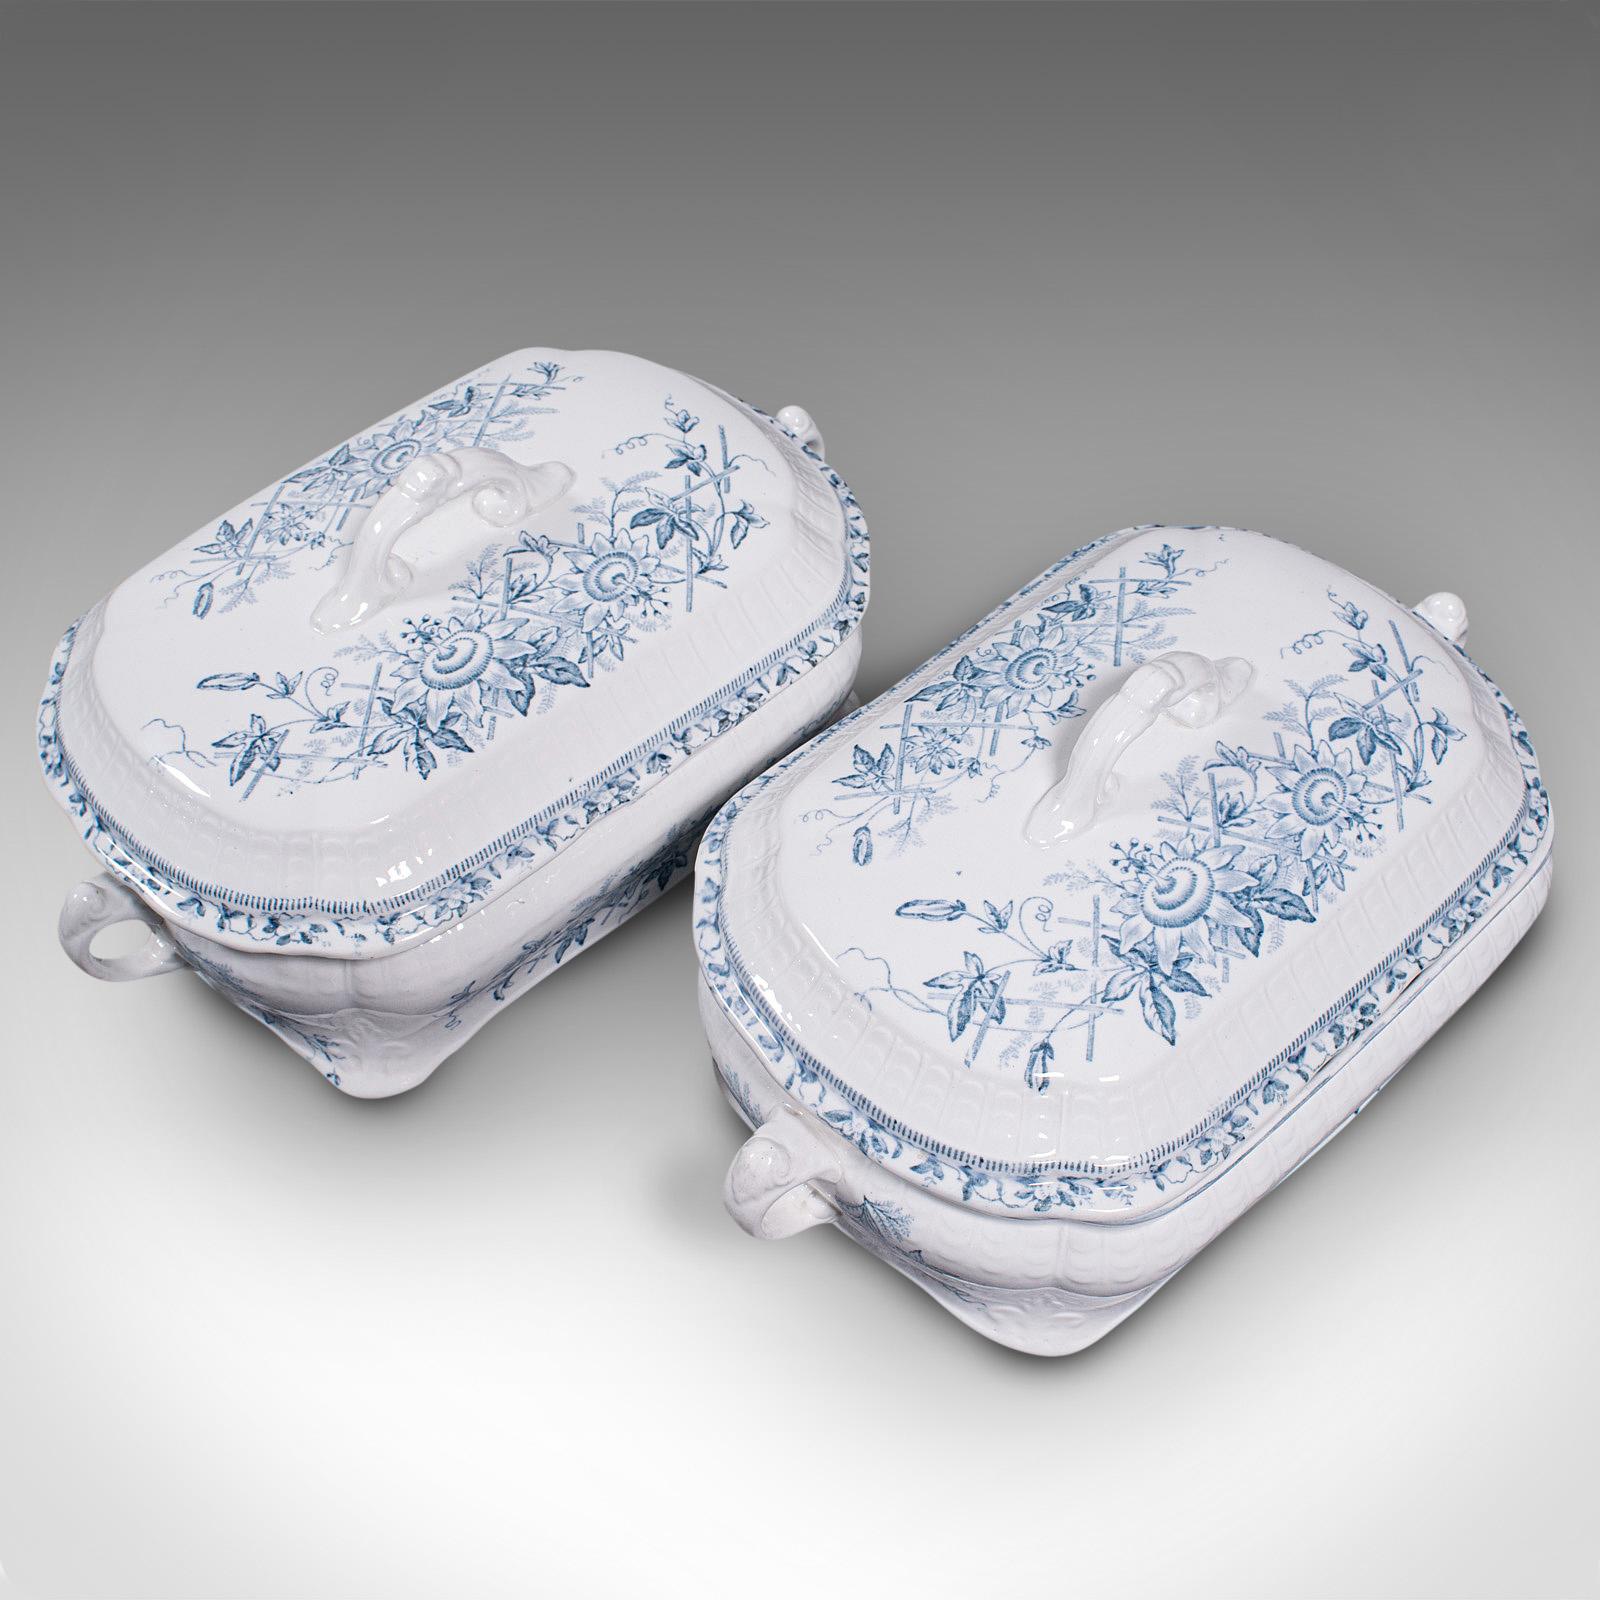 Pair of Antique Serving Tureens, English, Ceramic, Lidded Dish, Victorian, 1900 For Sale 1